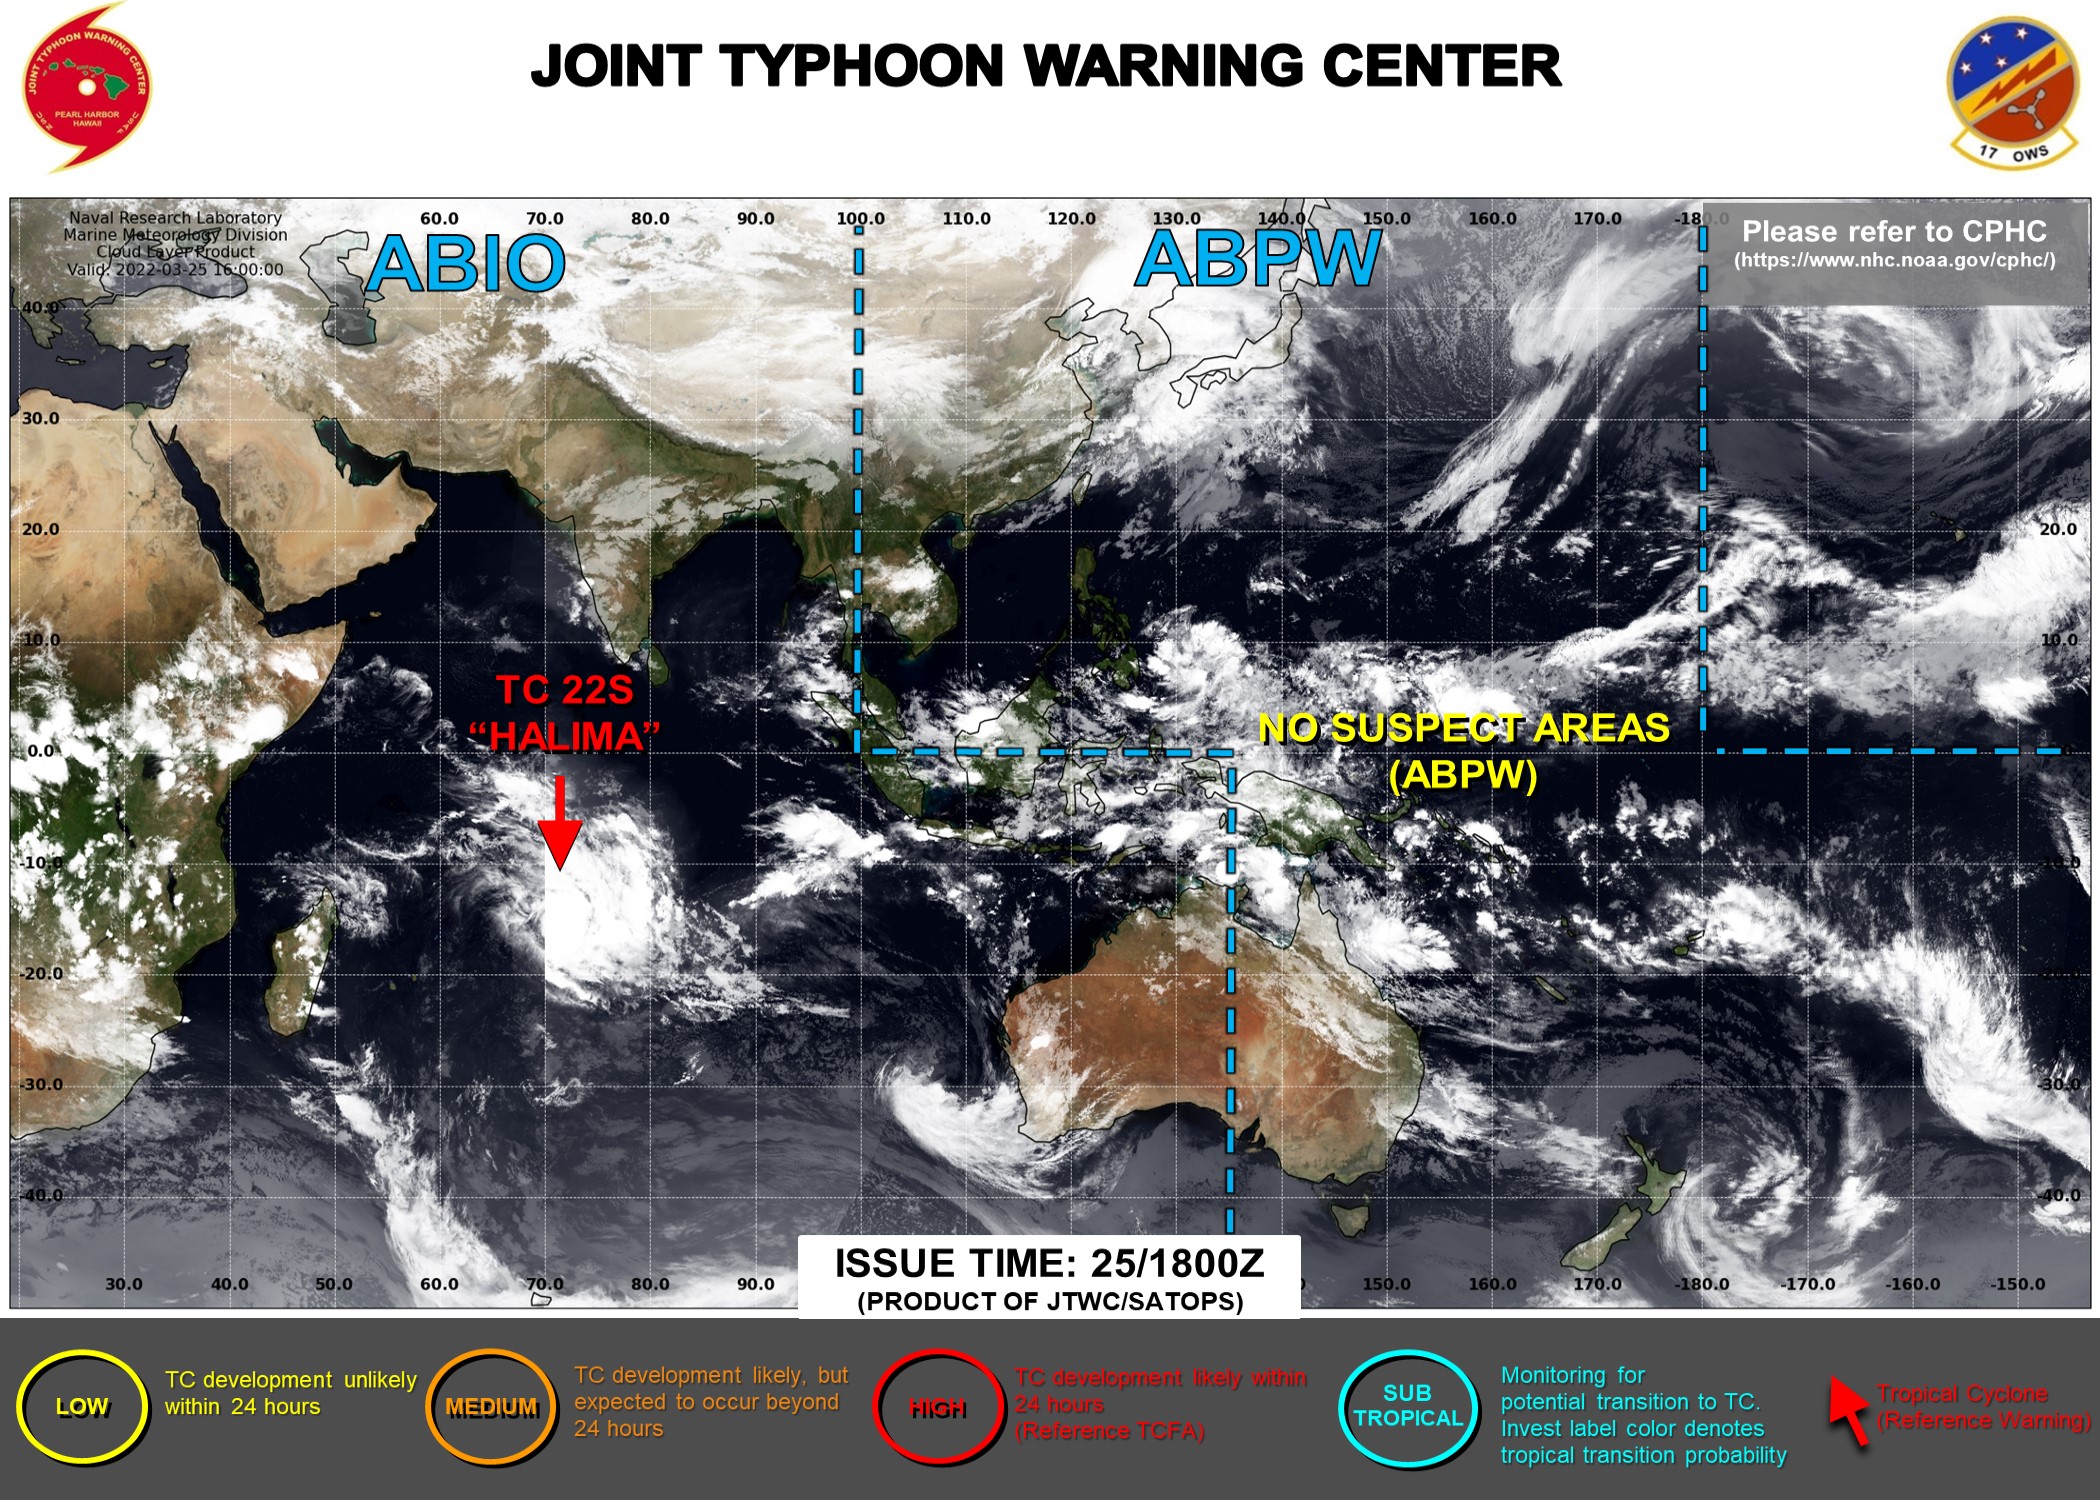 JTWC IS ISSUING 12HOURLY WARNINGS AND 3HOURLY SATELLITE BULLETINS ON TC 22S(HALIMA).